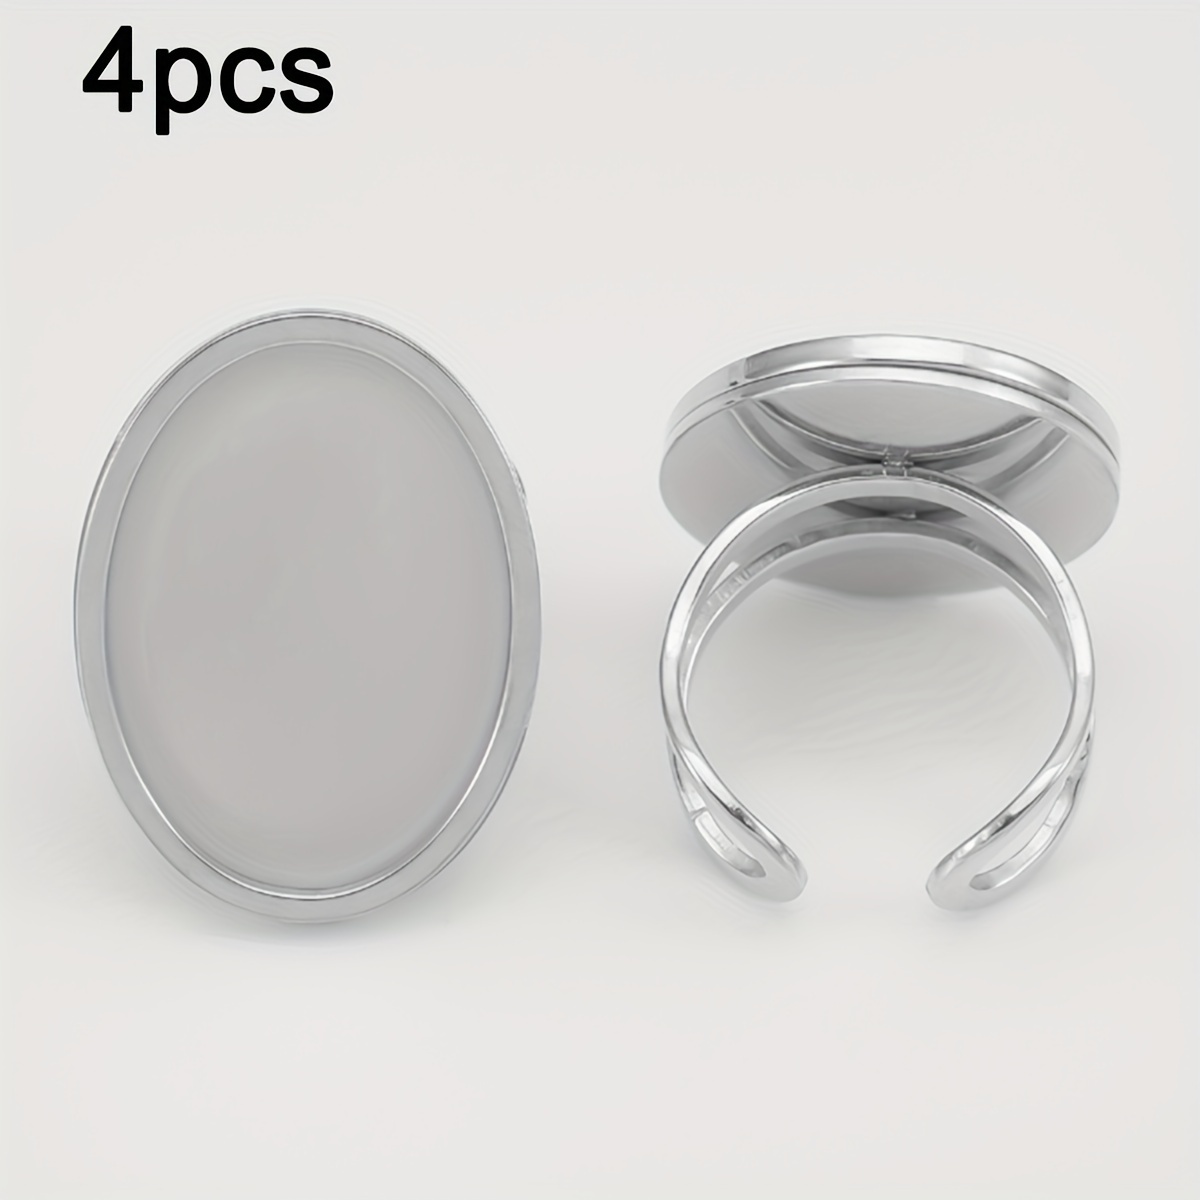 4pcs Stainless Steel Gold Rings Cabochon Setting Bezel Blank Ring Jewelry  Making